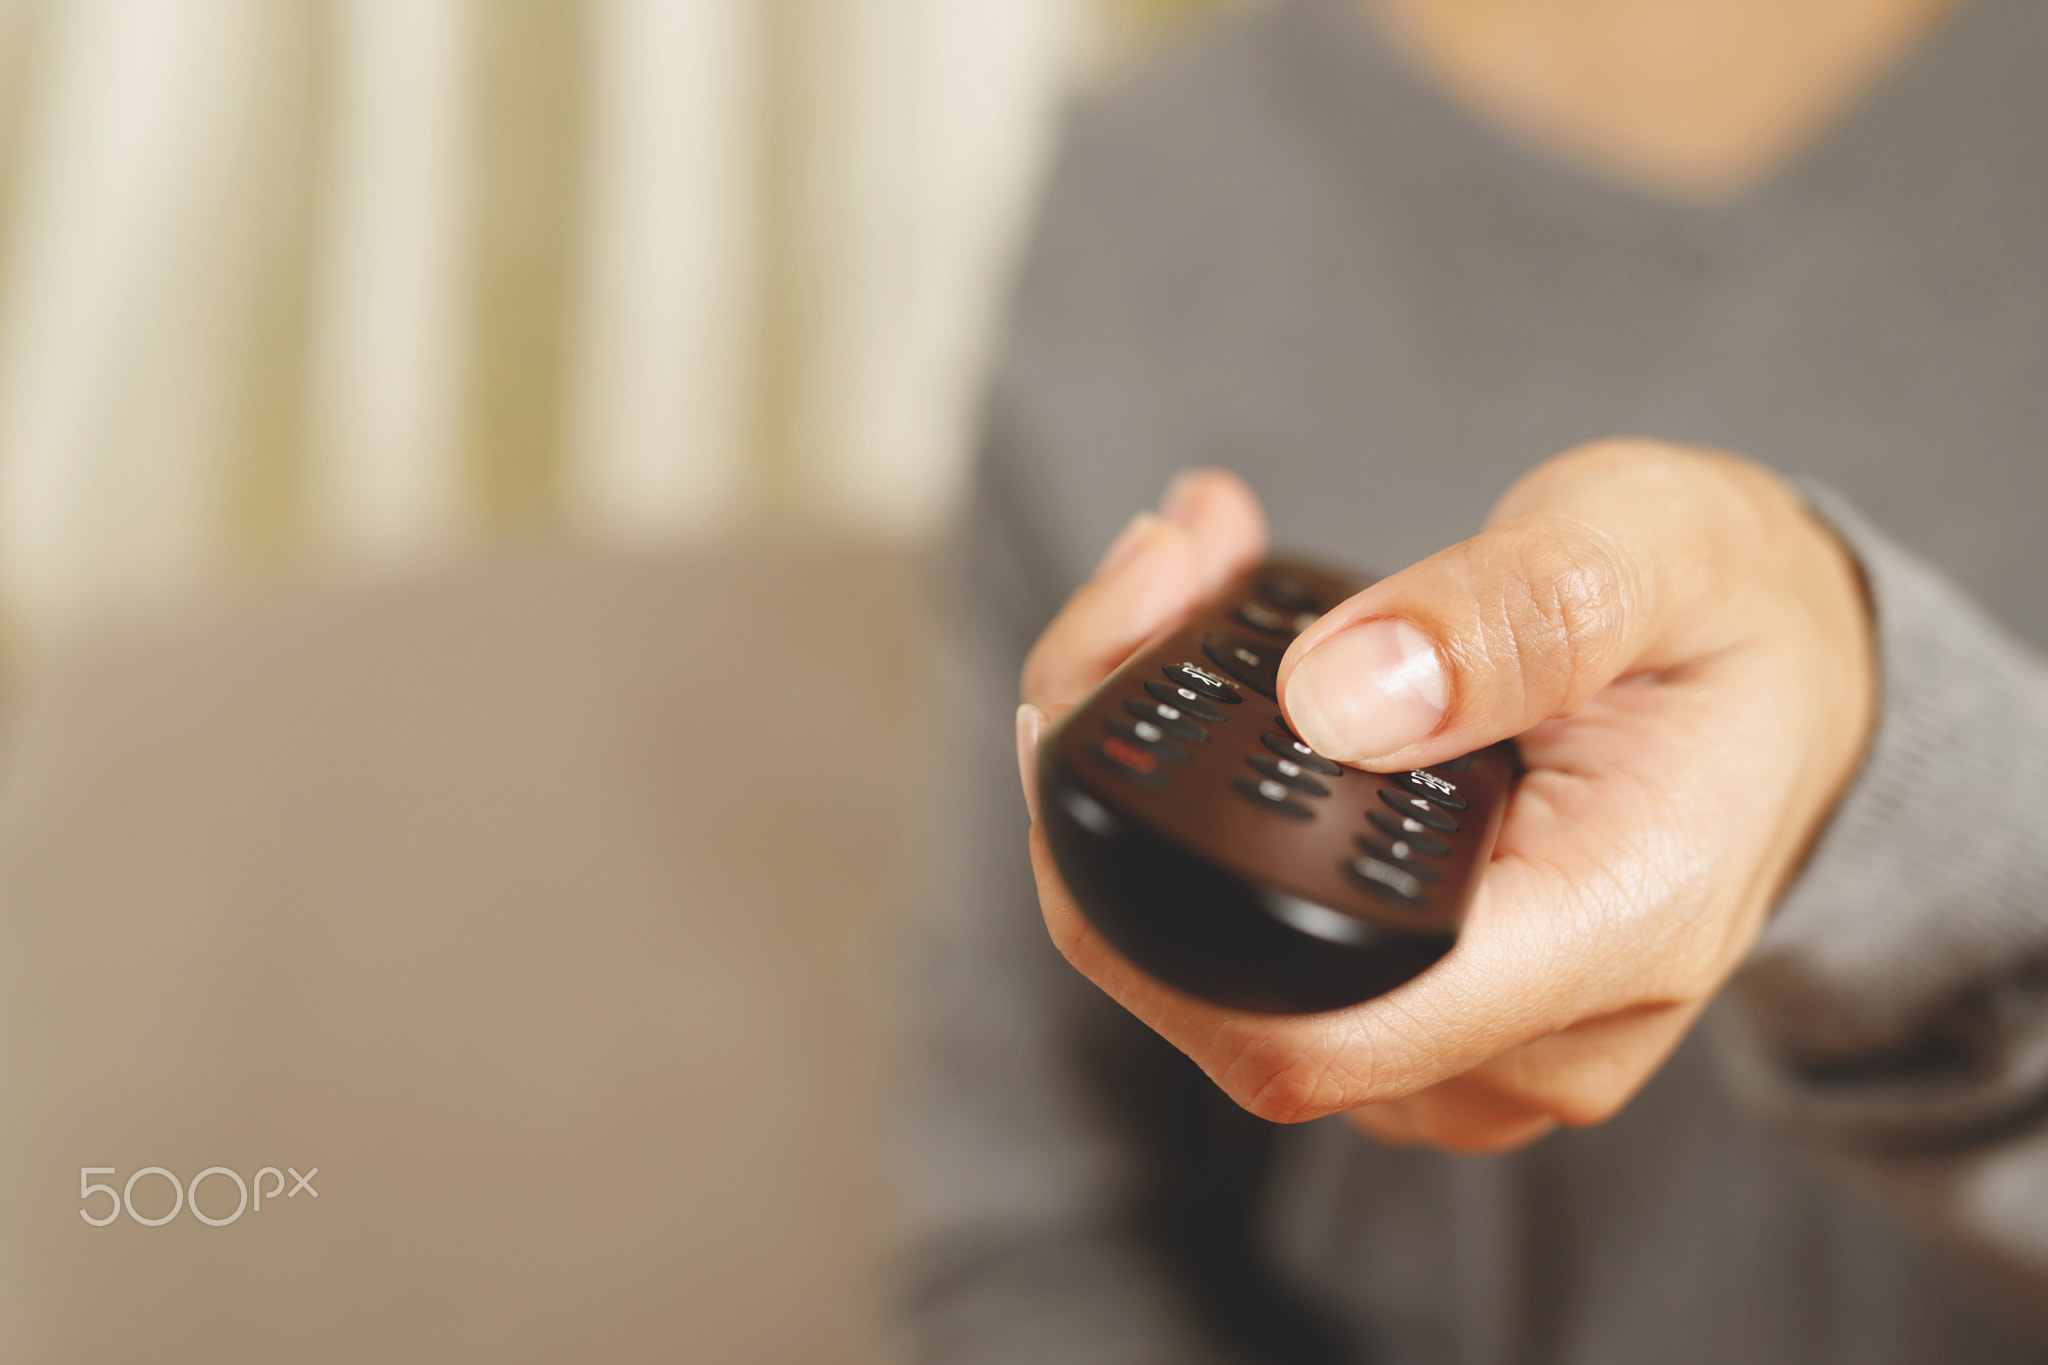 Woman presses online TV remote at home